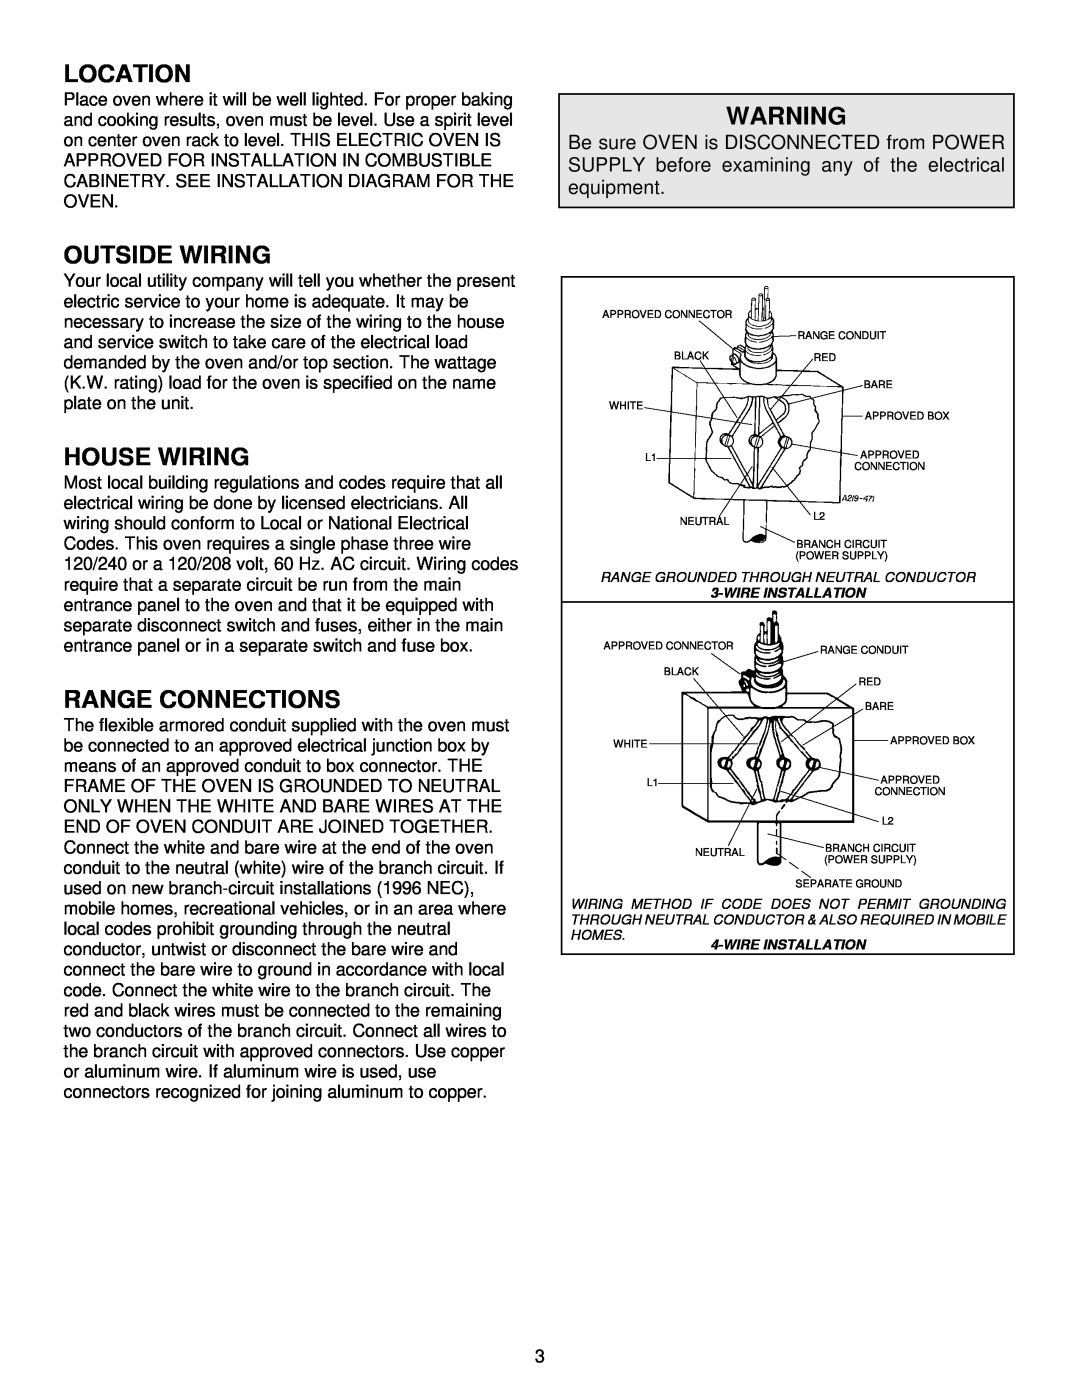 Maytag CWE4800ACE installation instructions Location, Outside Wiring, House Wiring, Range Connections, Wire Installation 